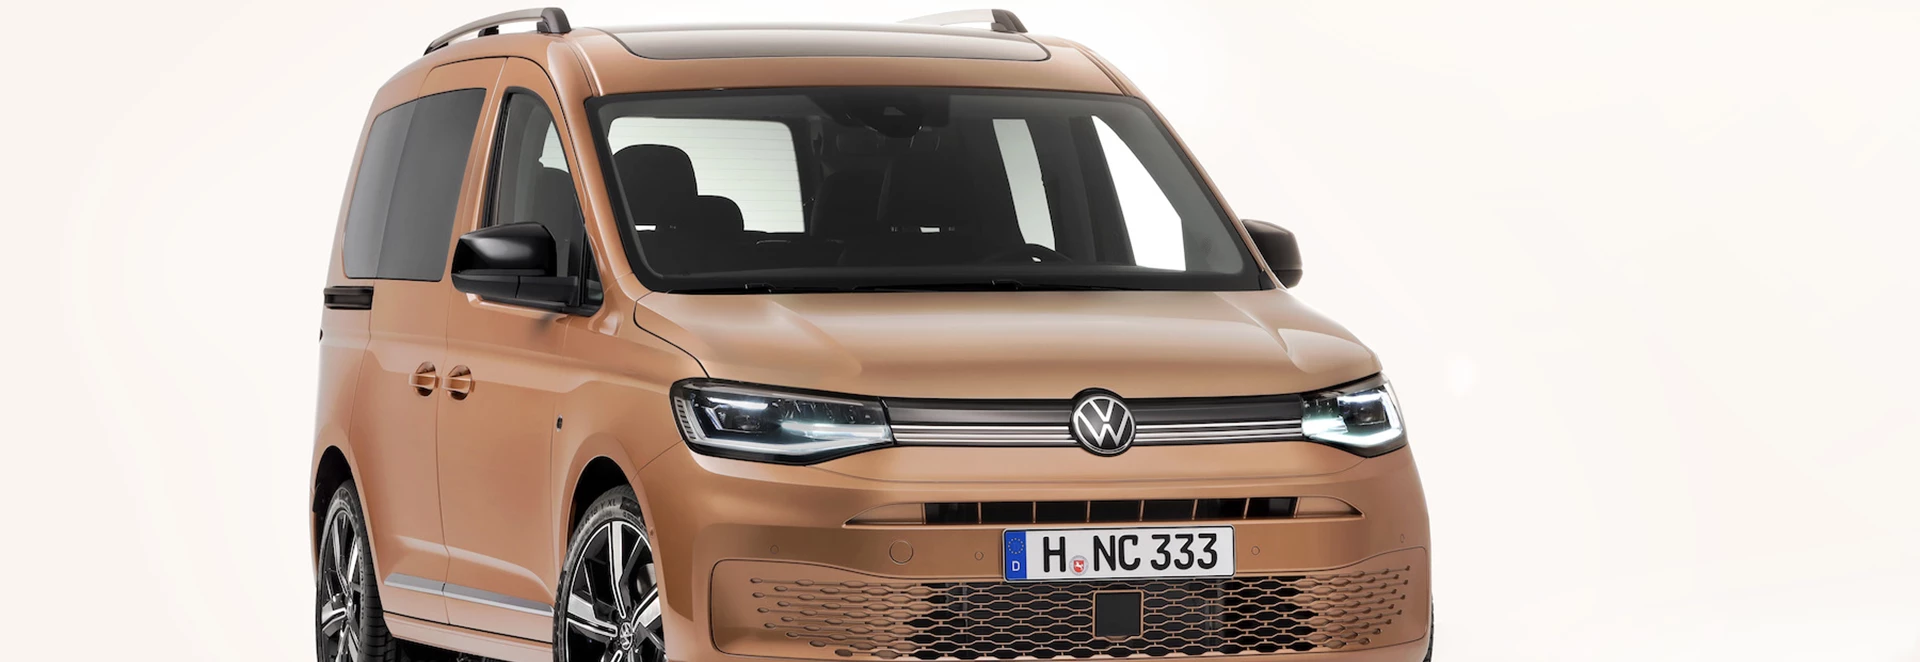 This is the all-new 2020 Volkswagen Caddy 